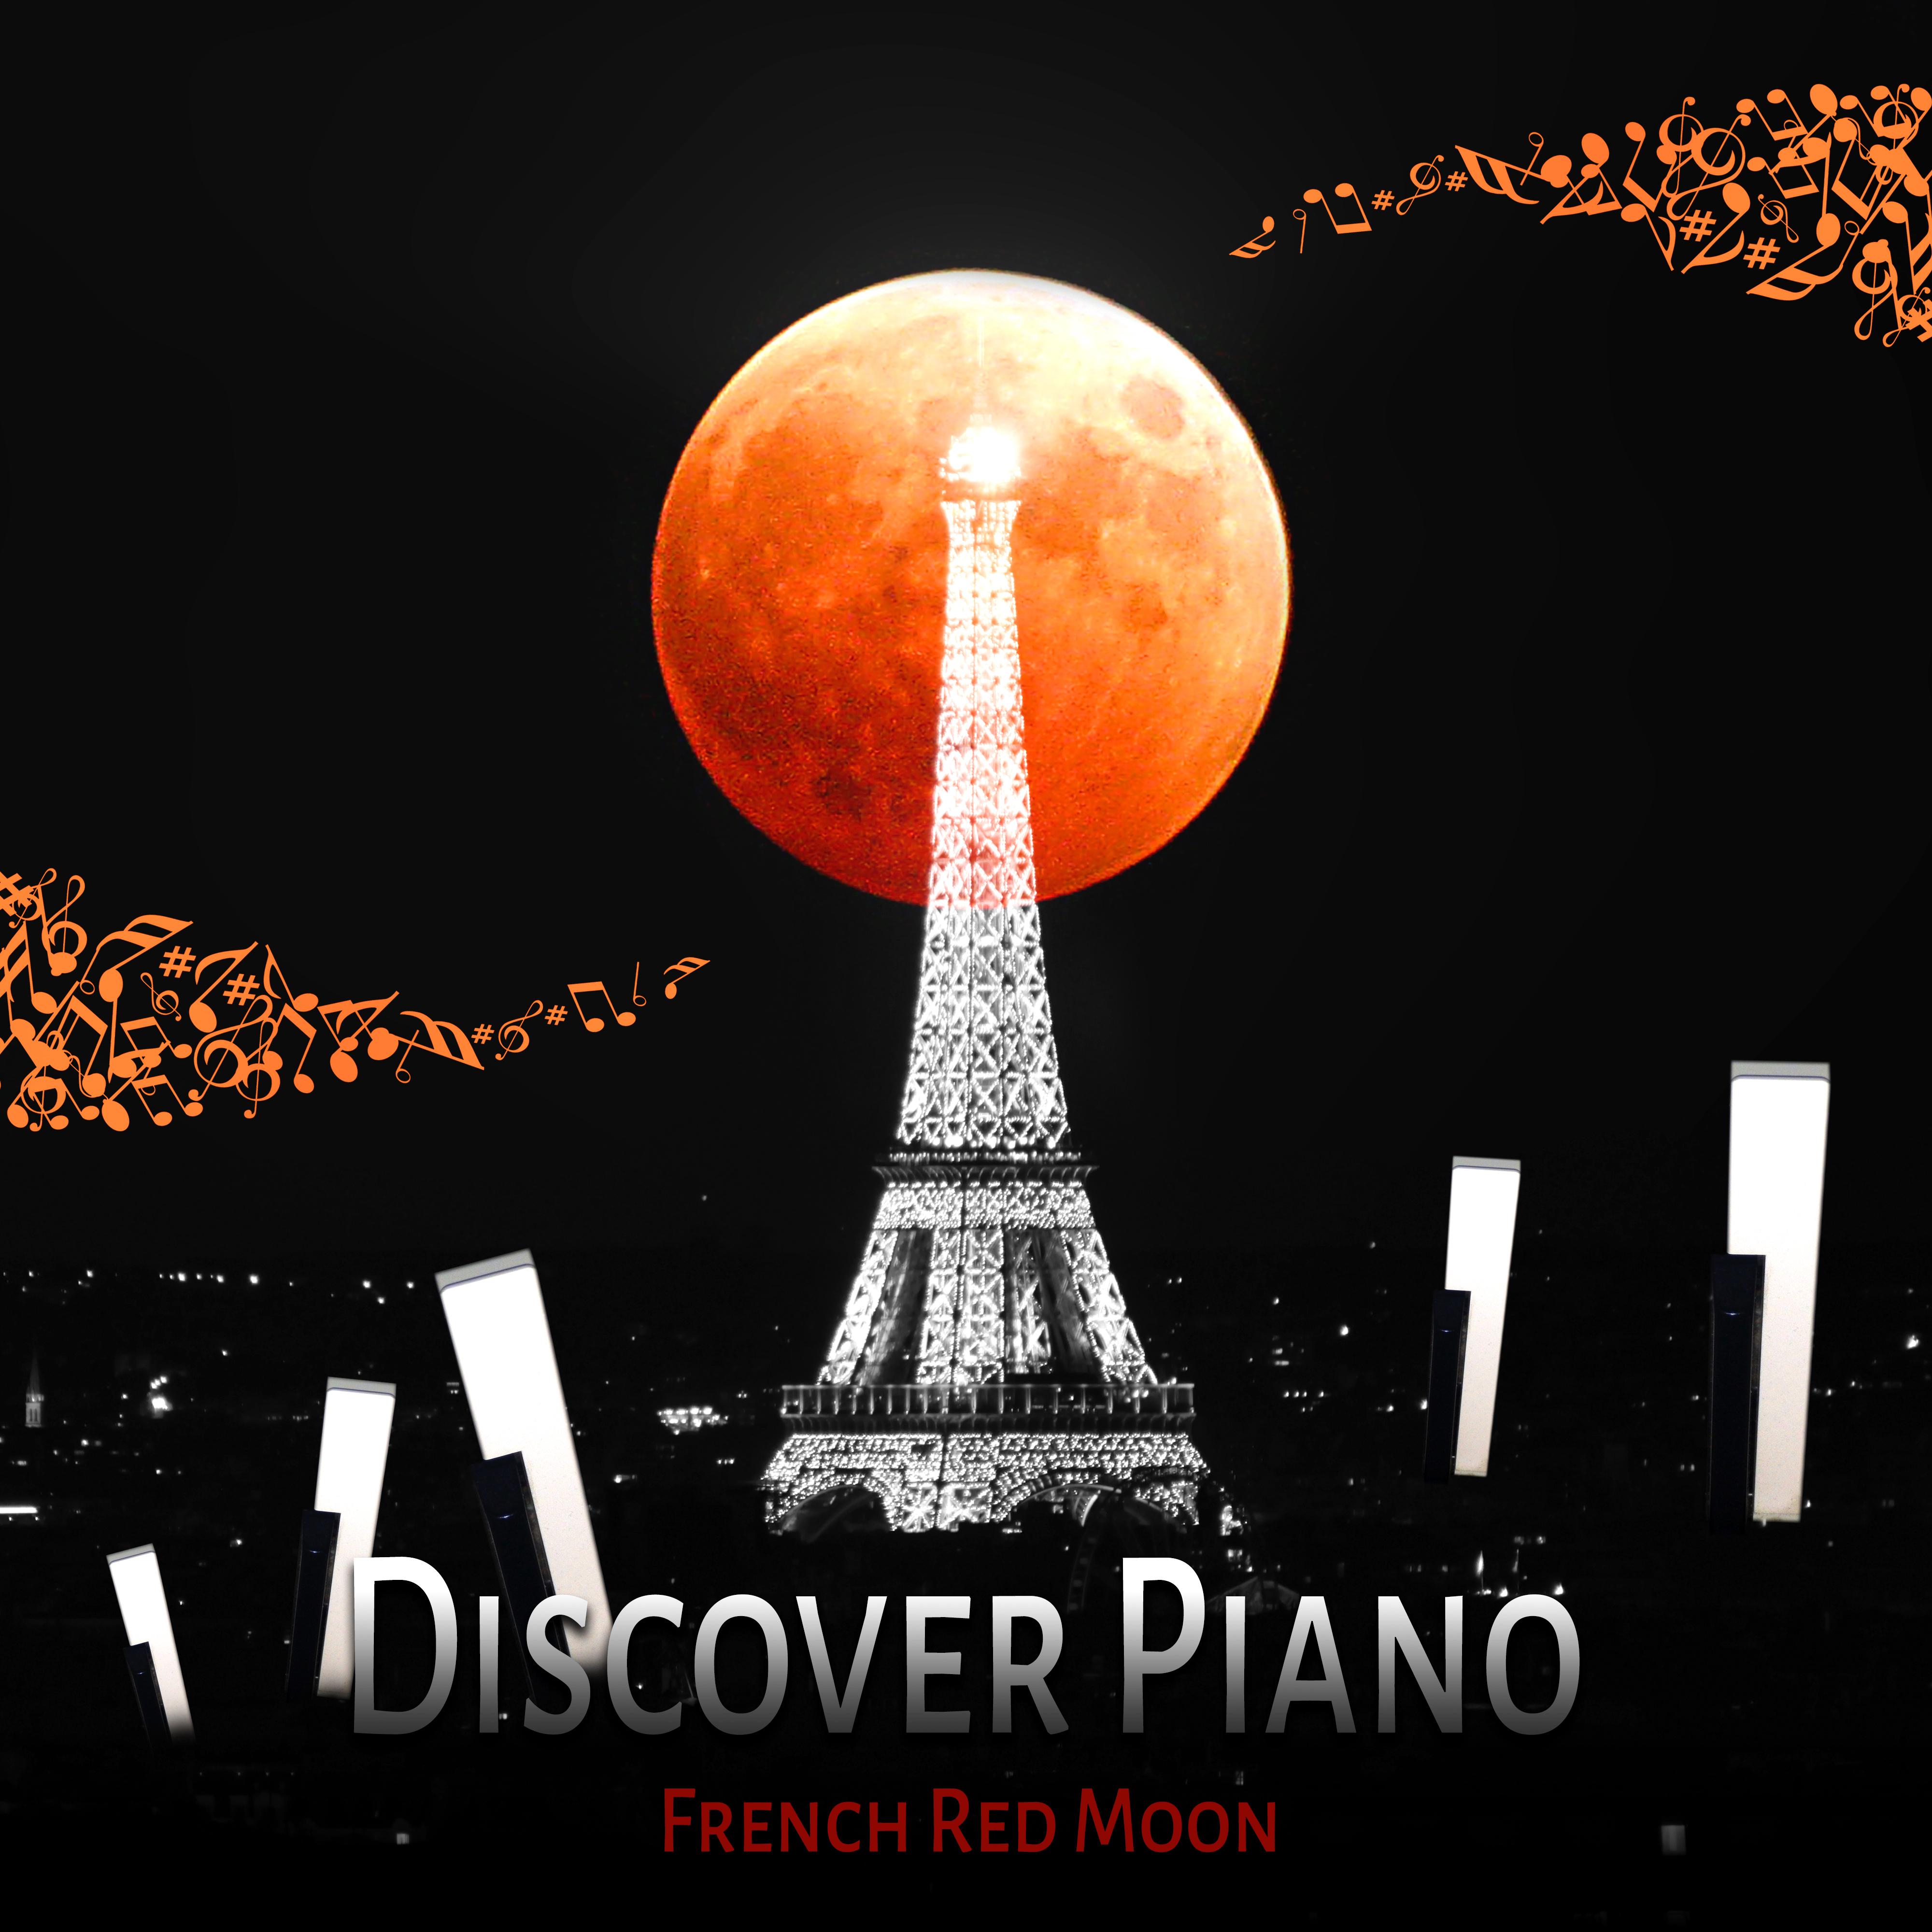 Discover Piano  French Red Moon  Romantic Piano Music, Love Novels, Moon Rise, Eternal Flame, Piano Pieces, Jazz Oasis